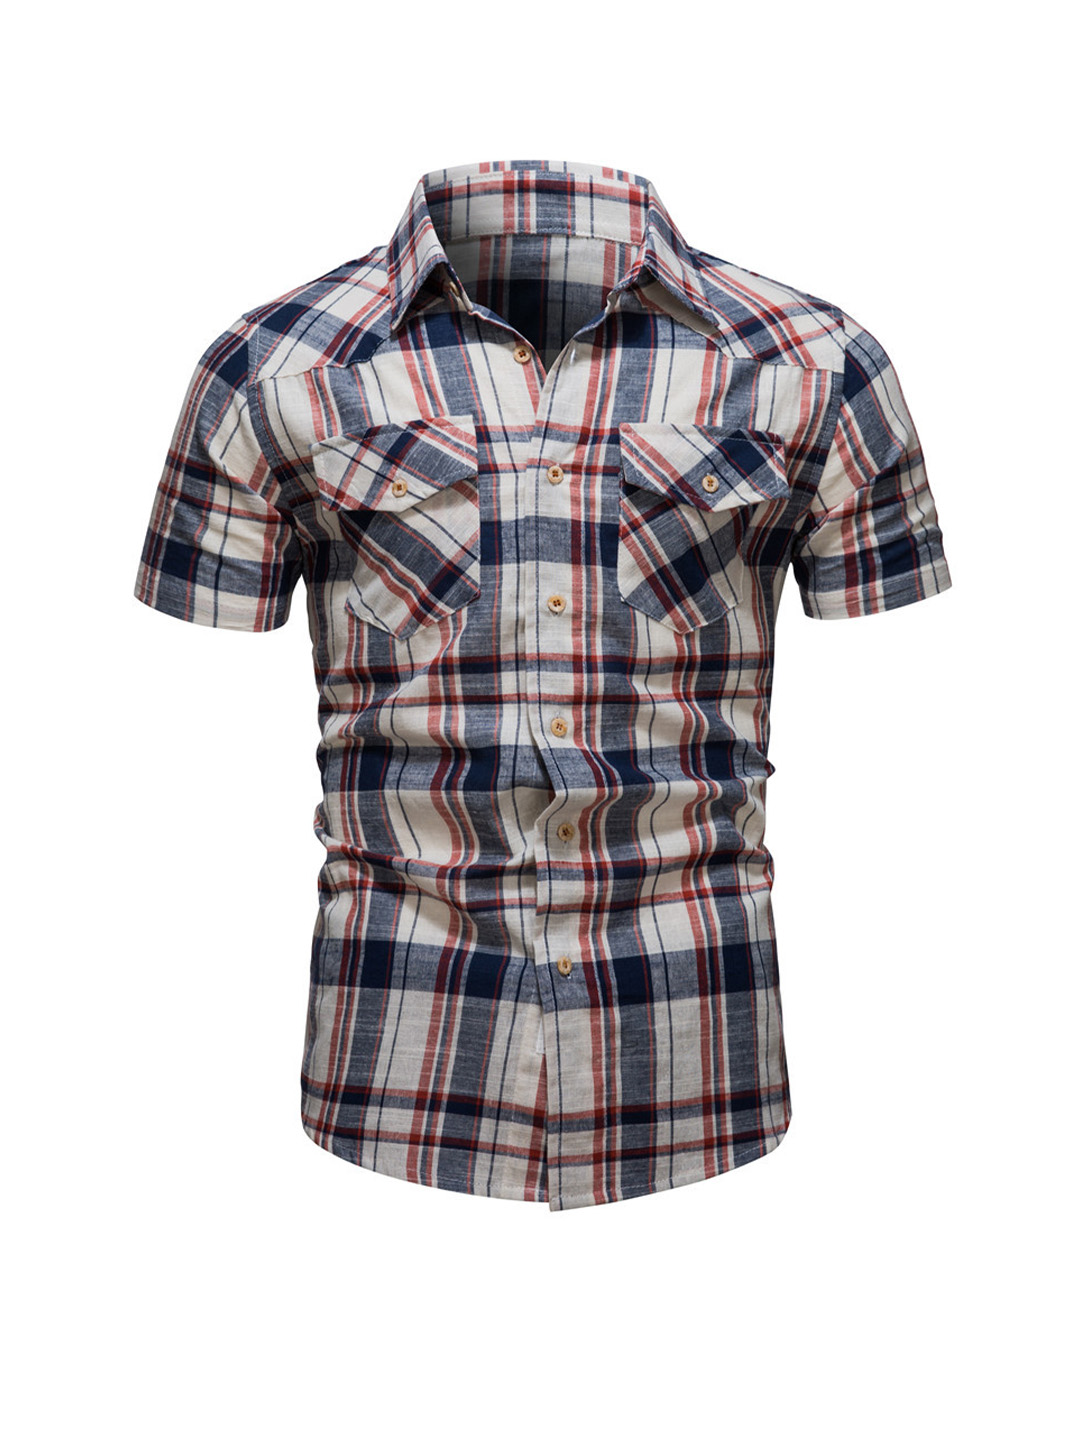 William Casual Double Pocket Check Shirt